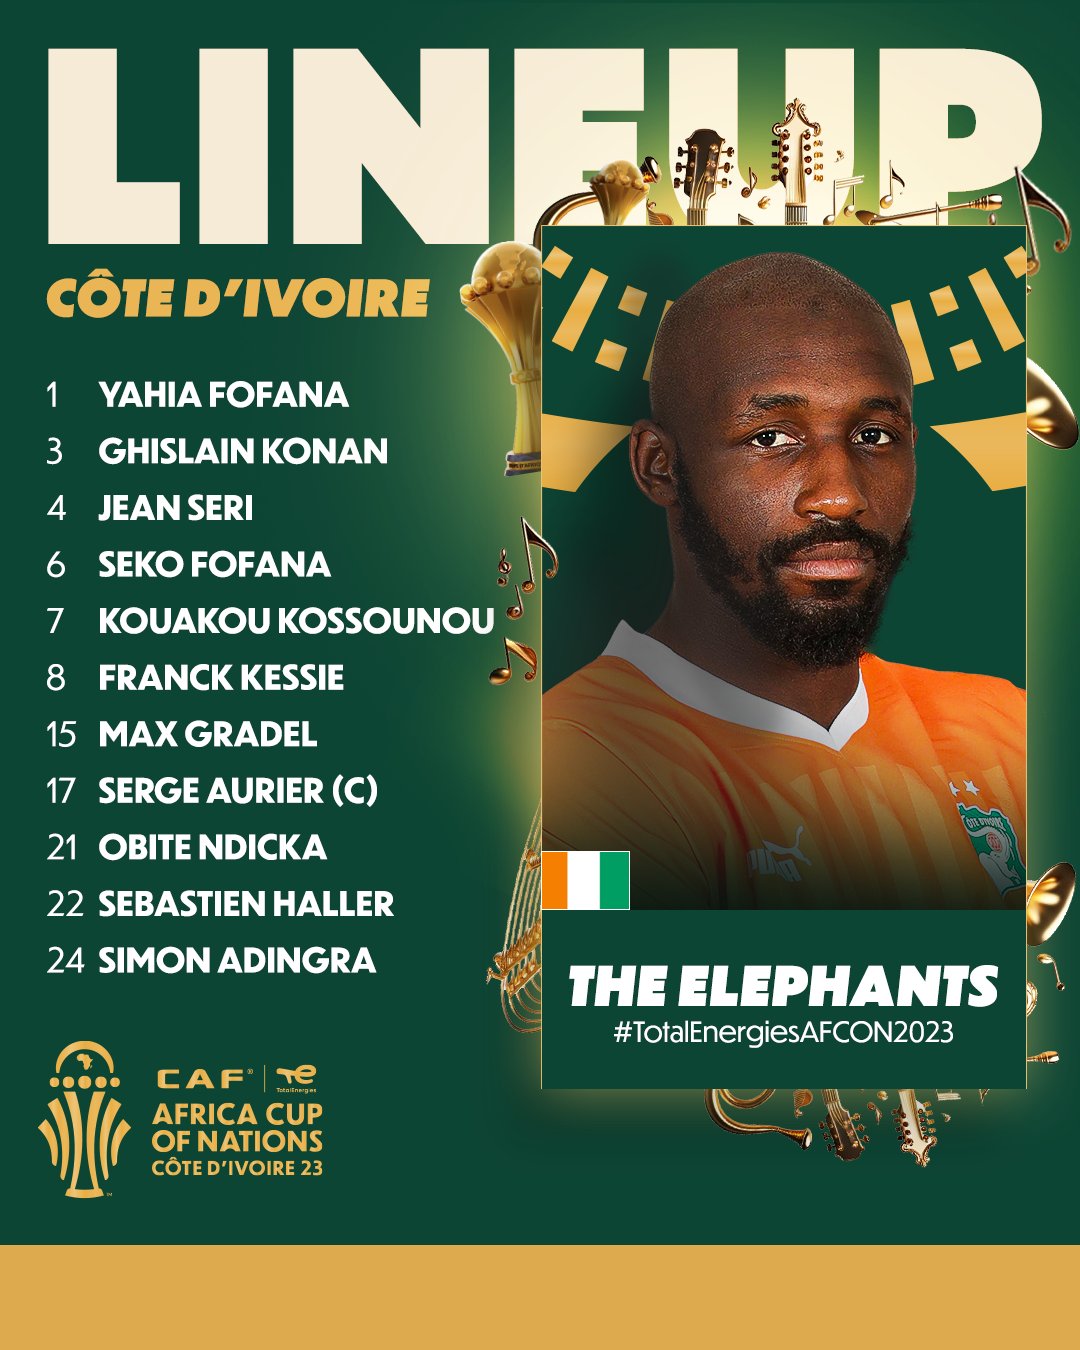 AFCON 2023: Slight different Cote D'Ivoire team against Super Eagles in the final compared to group stage